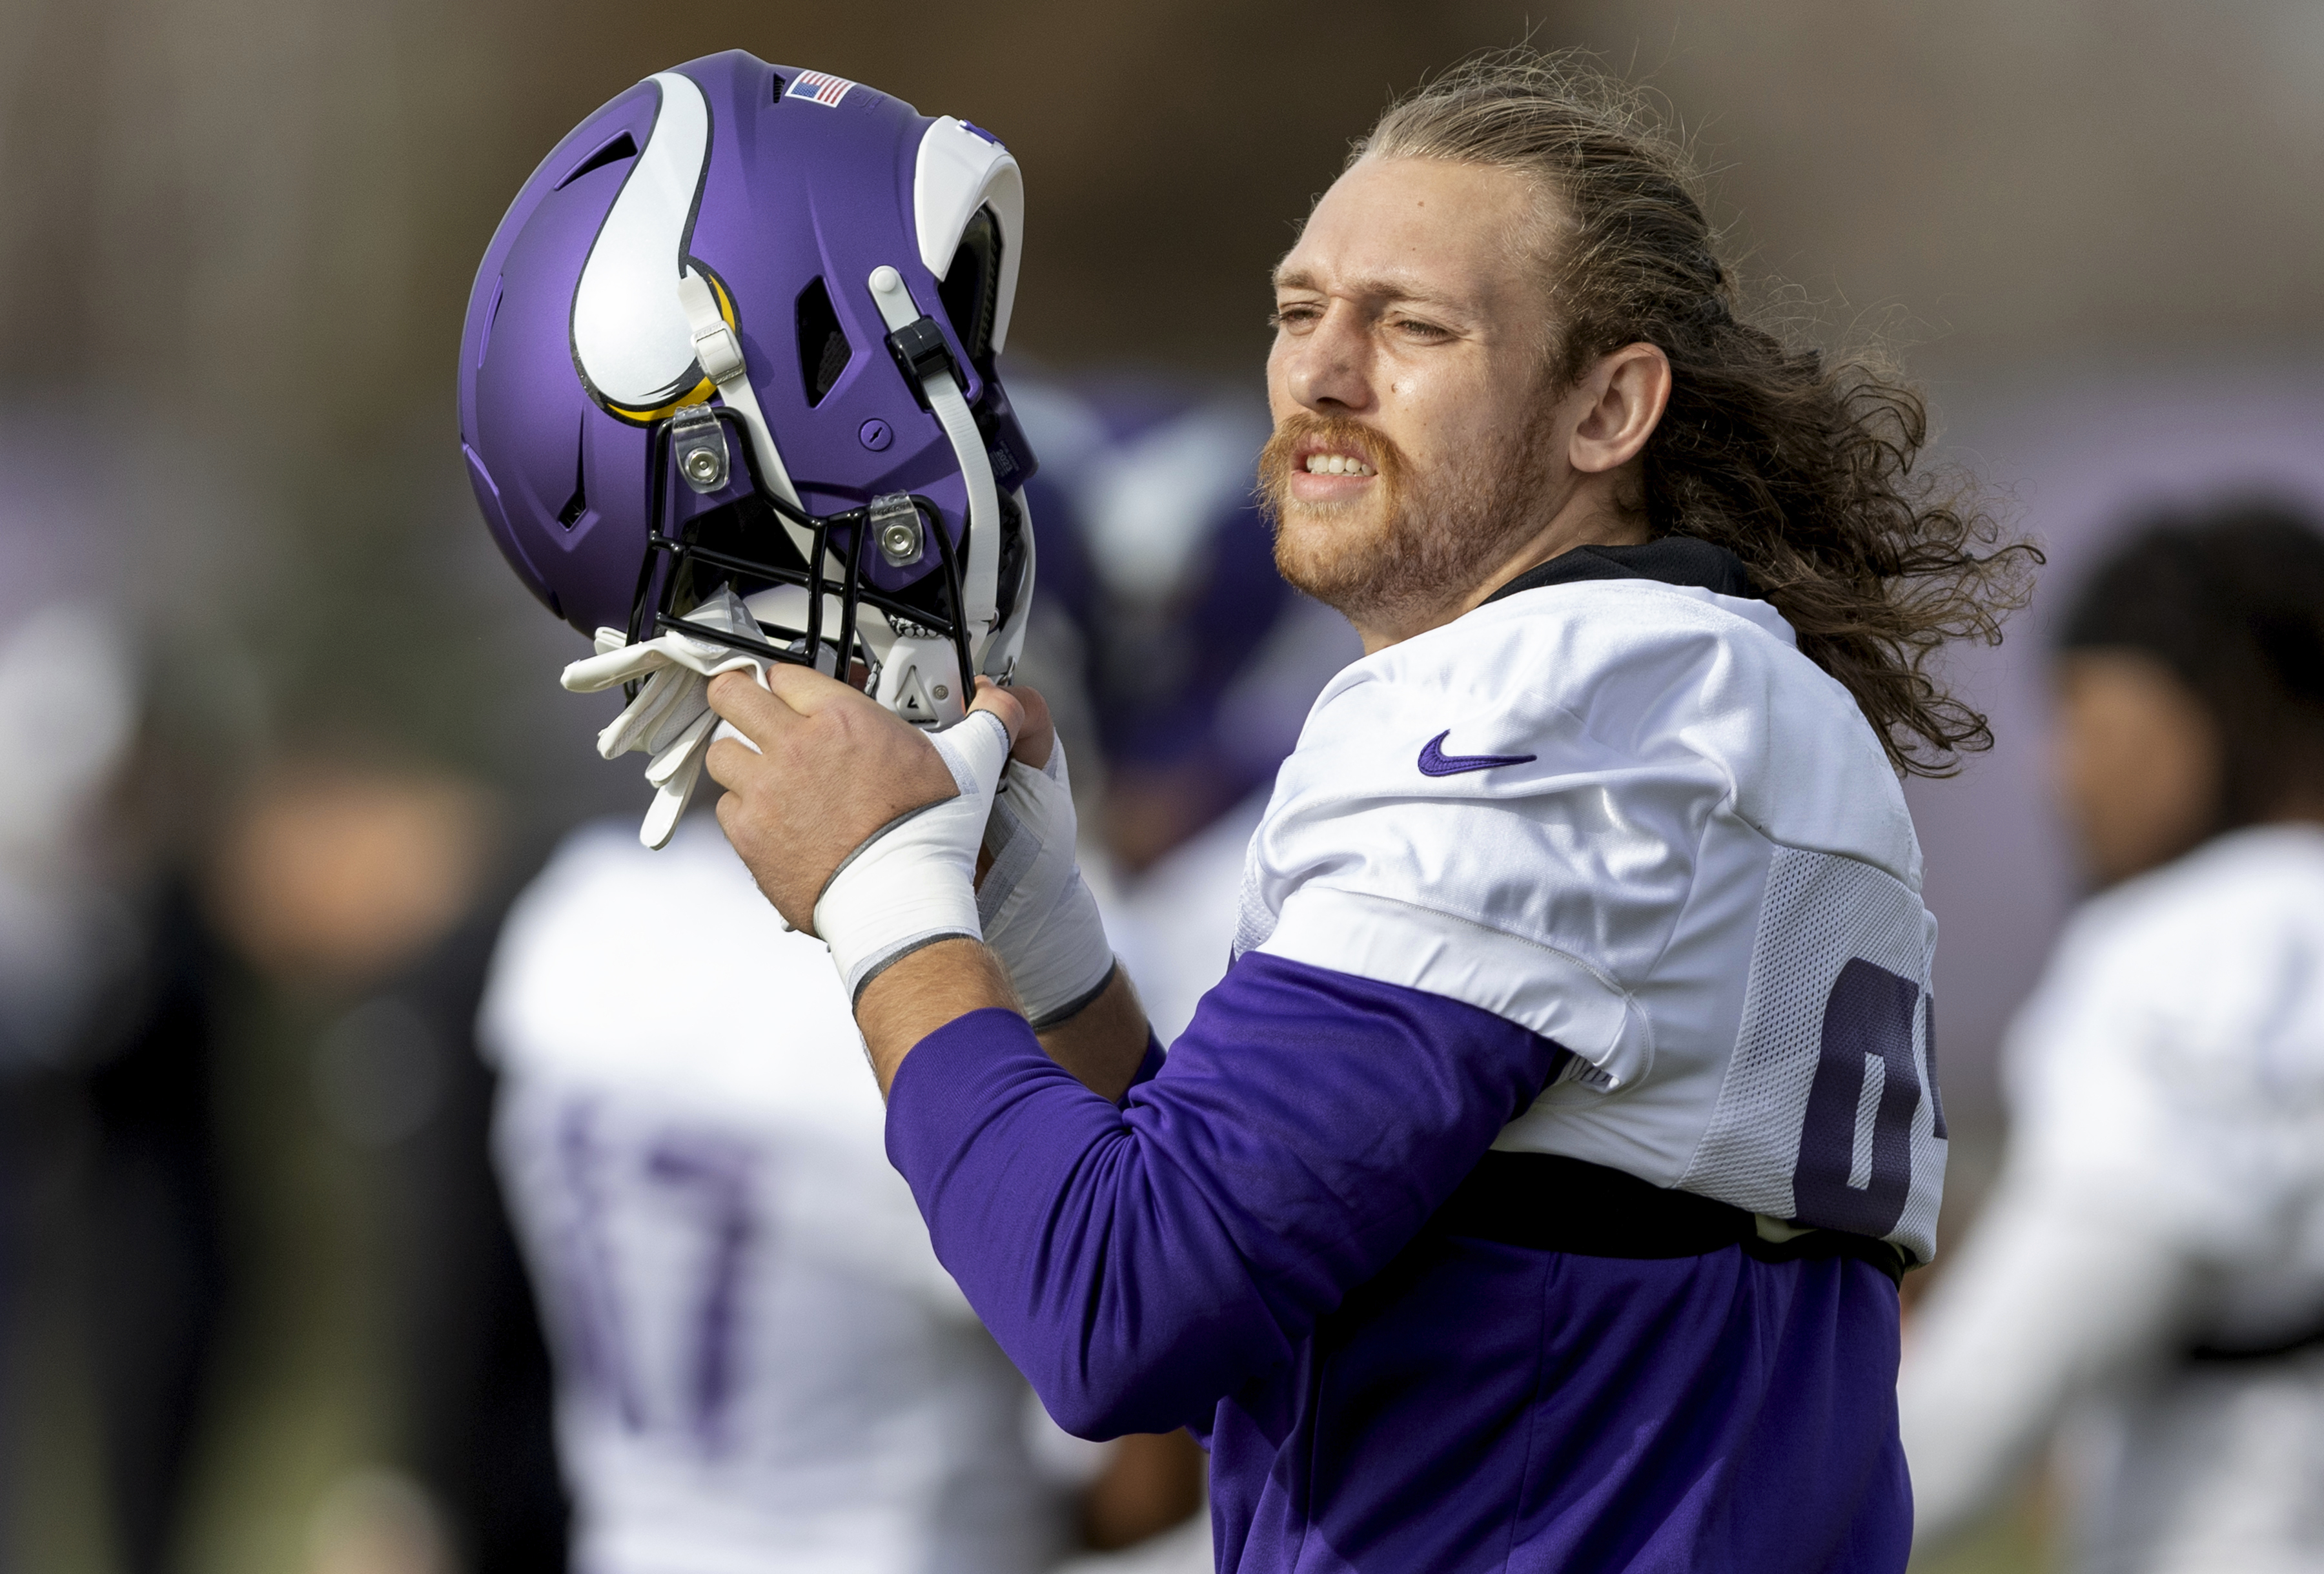 Newly acquired Minnesota Vikings tight end T.J. Hockenson (87)  during NFL football practice on Wednesday, Nov. 2, 2022, in Eagan, Minn. Hockenson has been one of the league’s most productive pass-catching tight ends since the Lions picked him eighth overall in the first round of the 2019 draft out of Iowa. (Carlos Gonzalez/Star Tribune via AP)